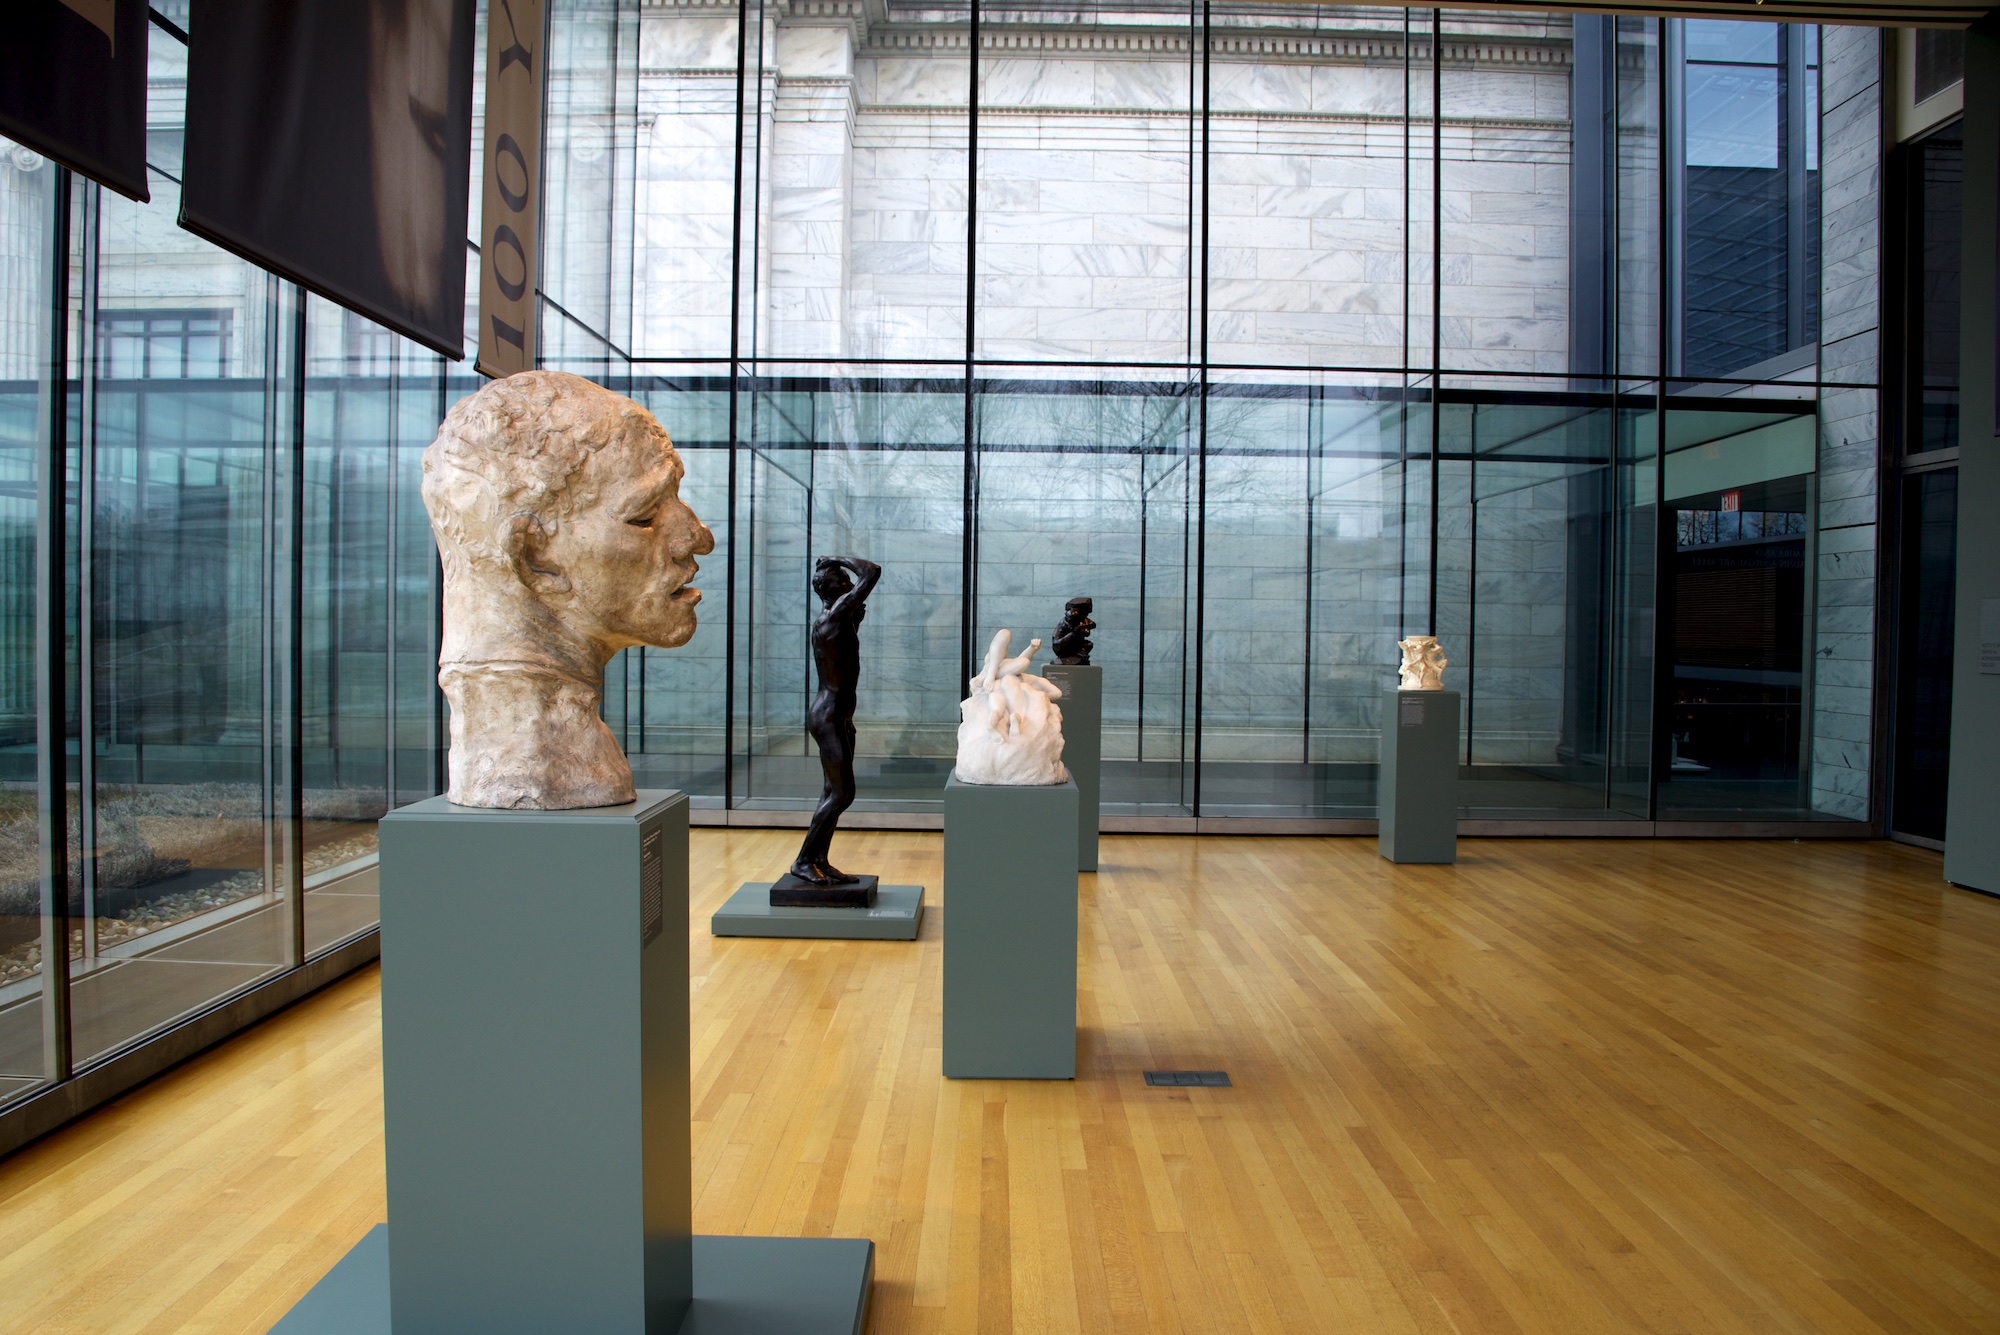 Gallery of #Rodin100 exhibit in Cleveland, Ohio at Cleveland Museum of Art.